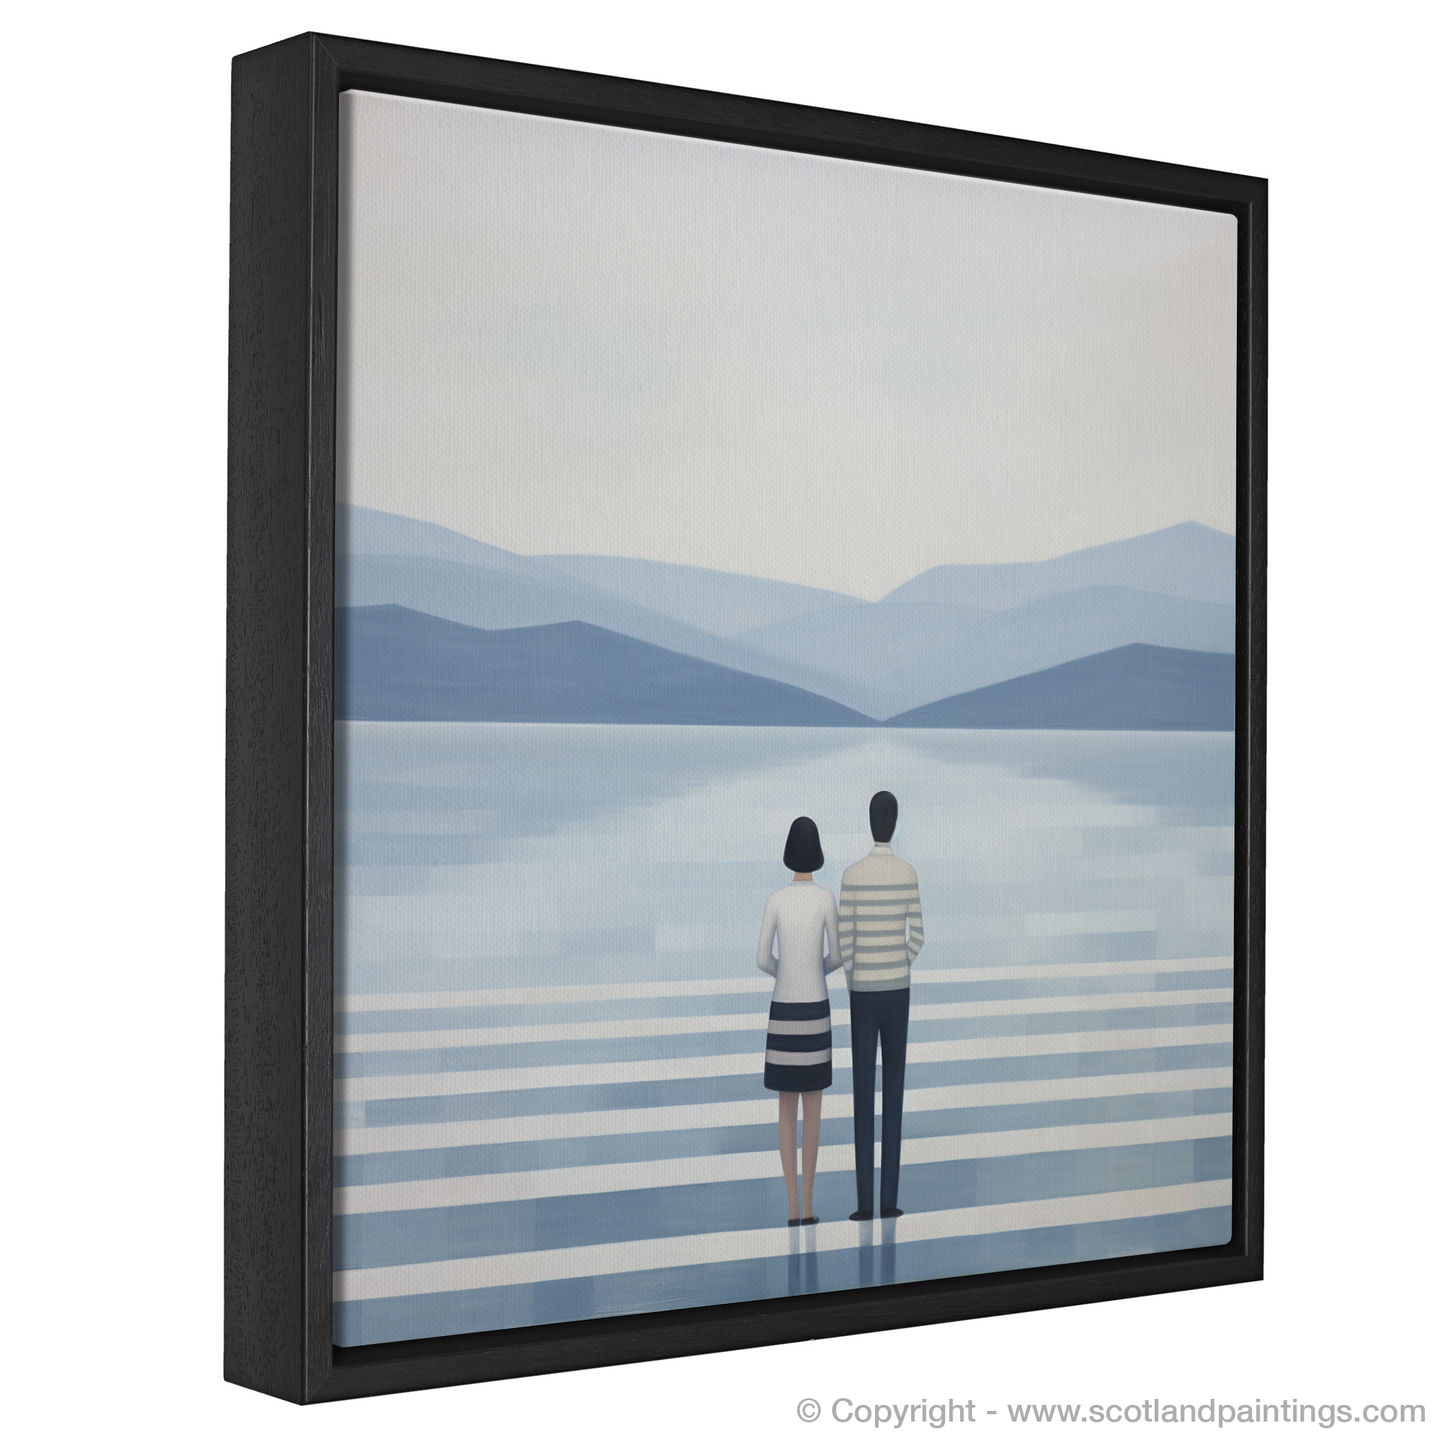 Painting and Art Print of A couple holding hands looking out on Loch Lomond entitled "Calm Companionship at Loch Lomond".